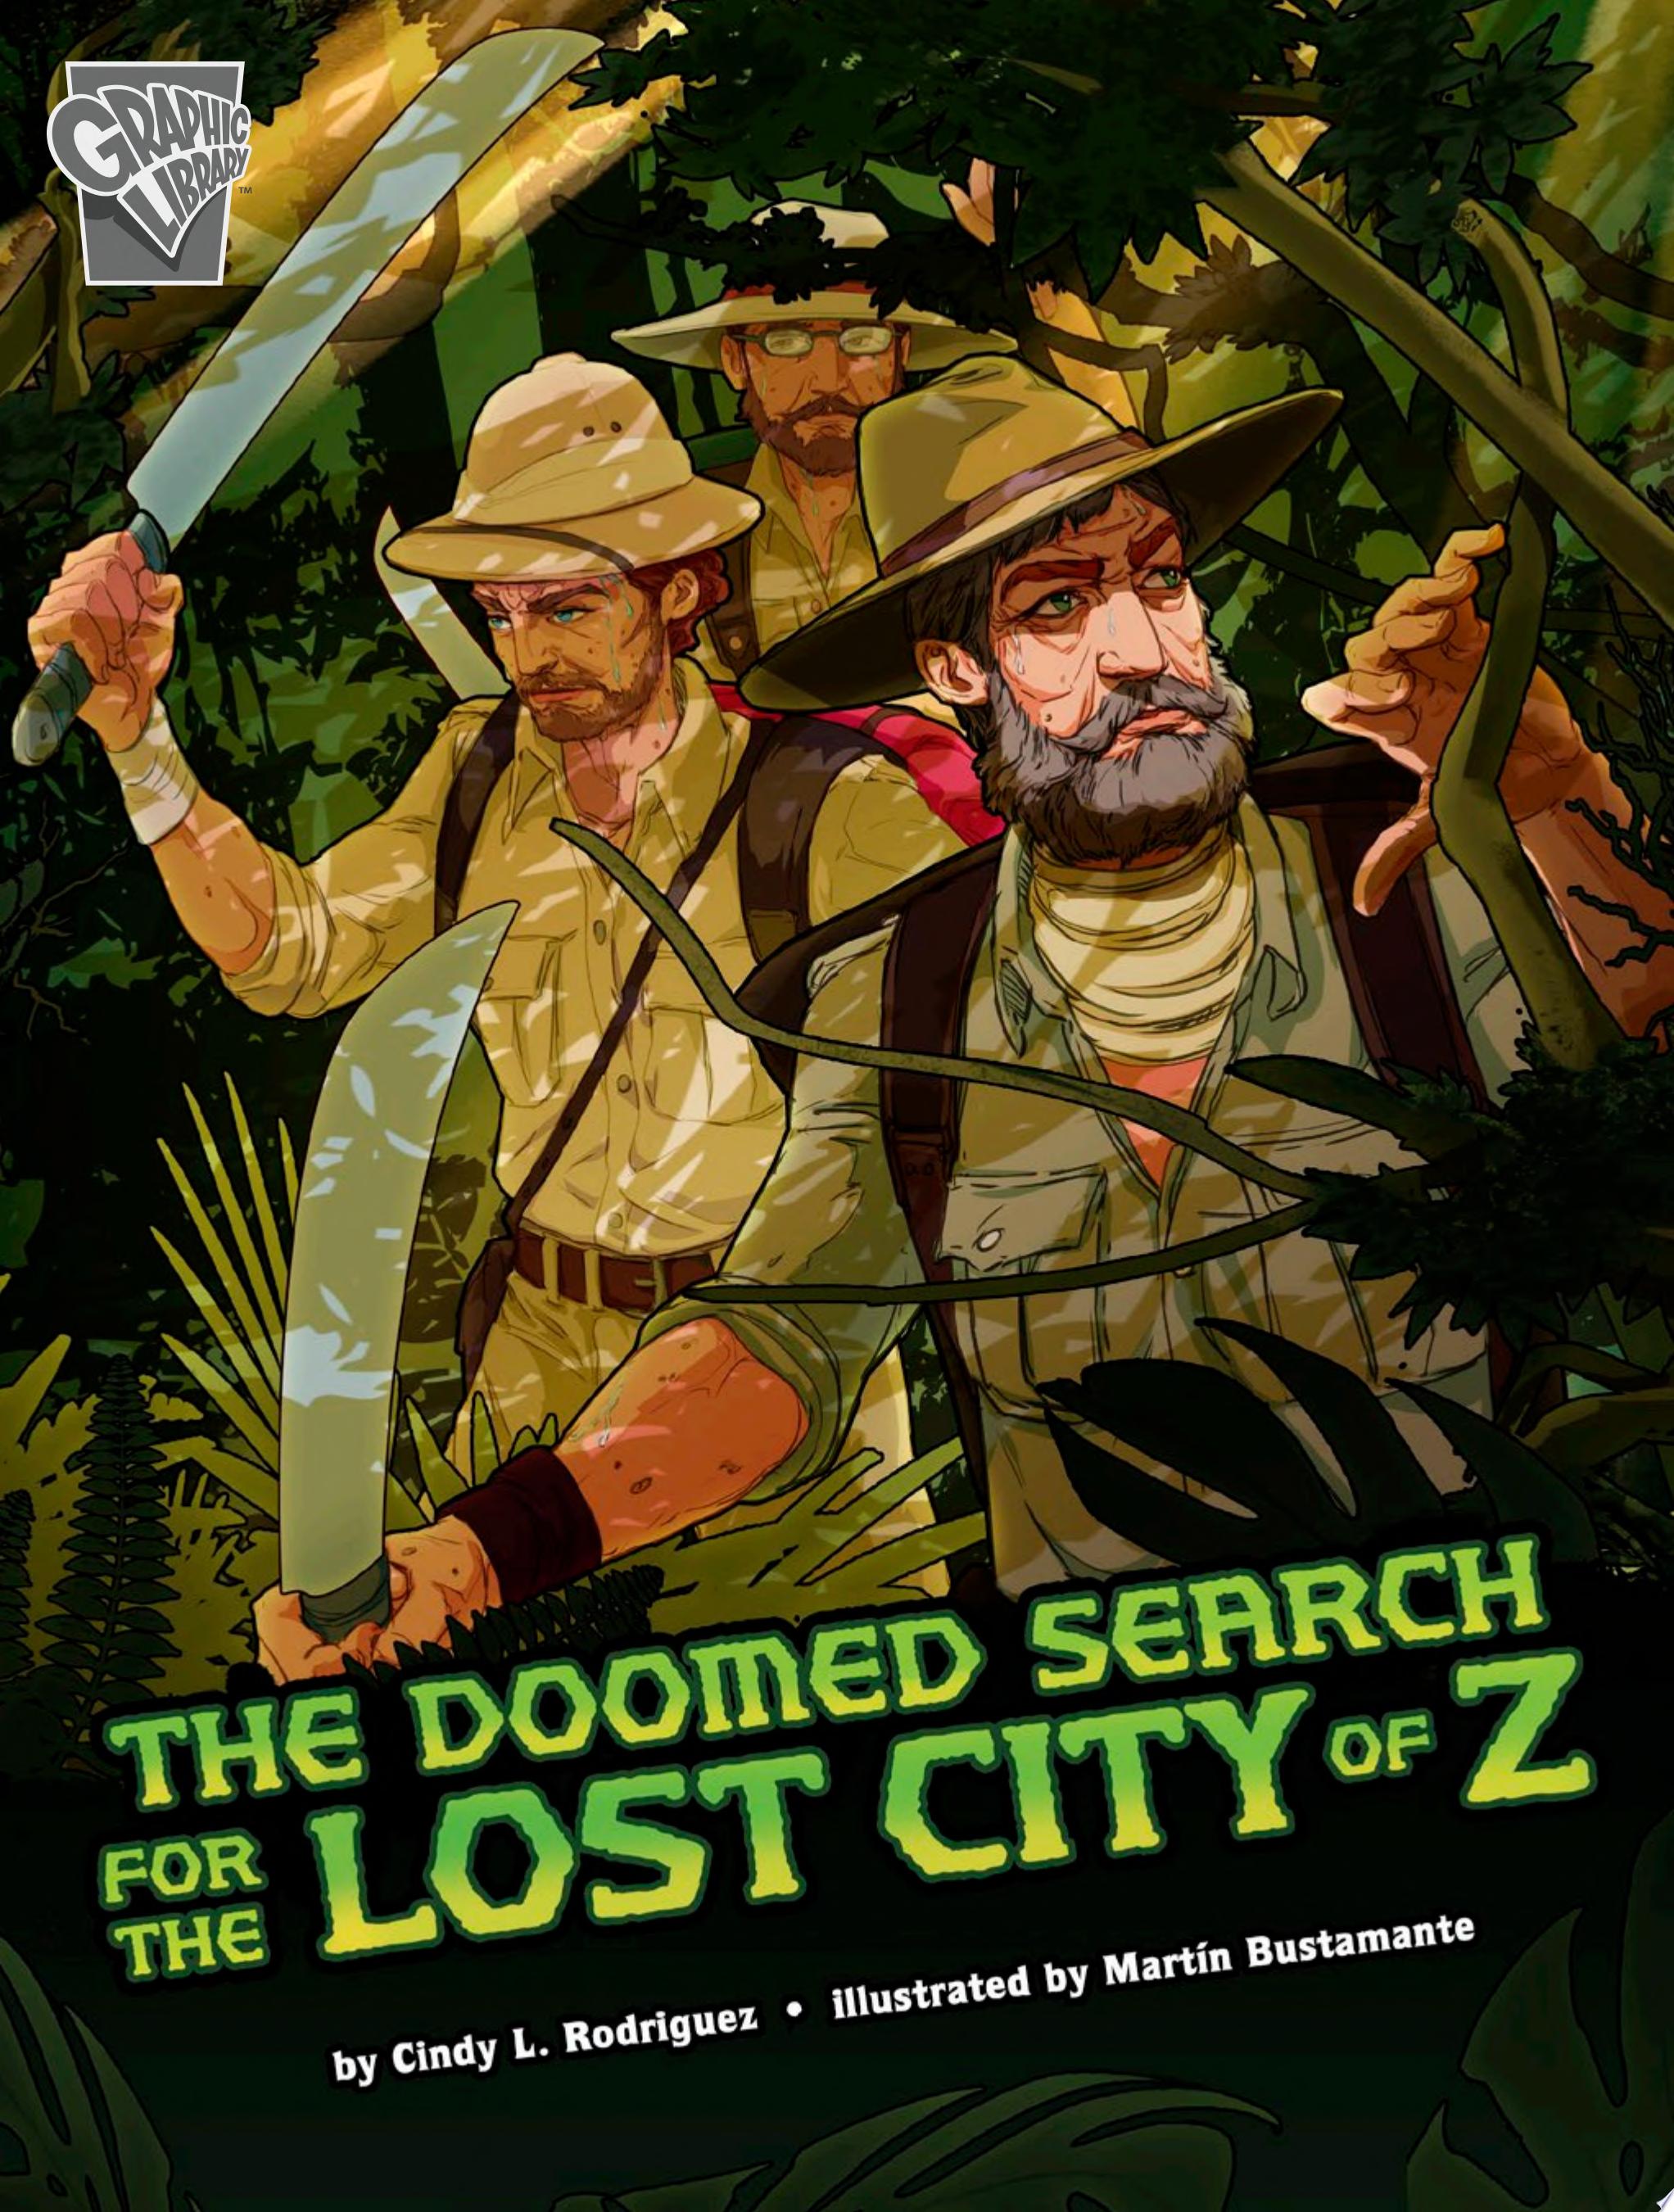 Image for "The Doomed Search for the Lost City of Z"